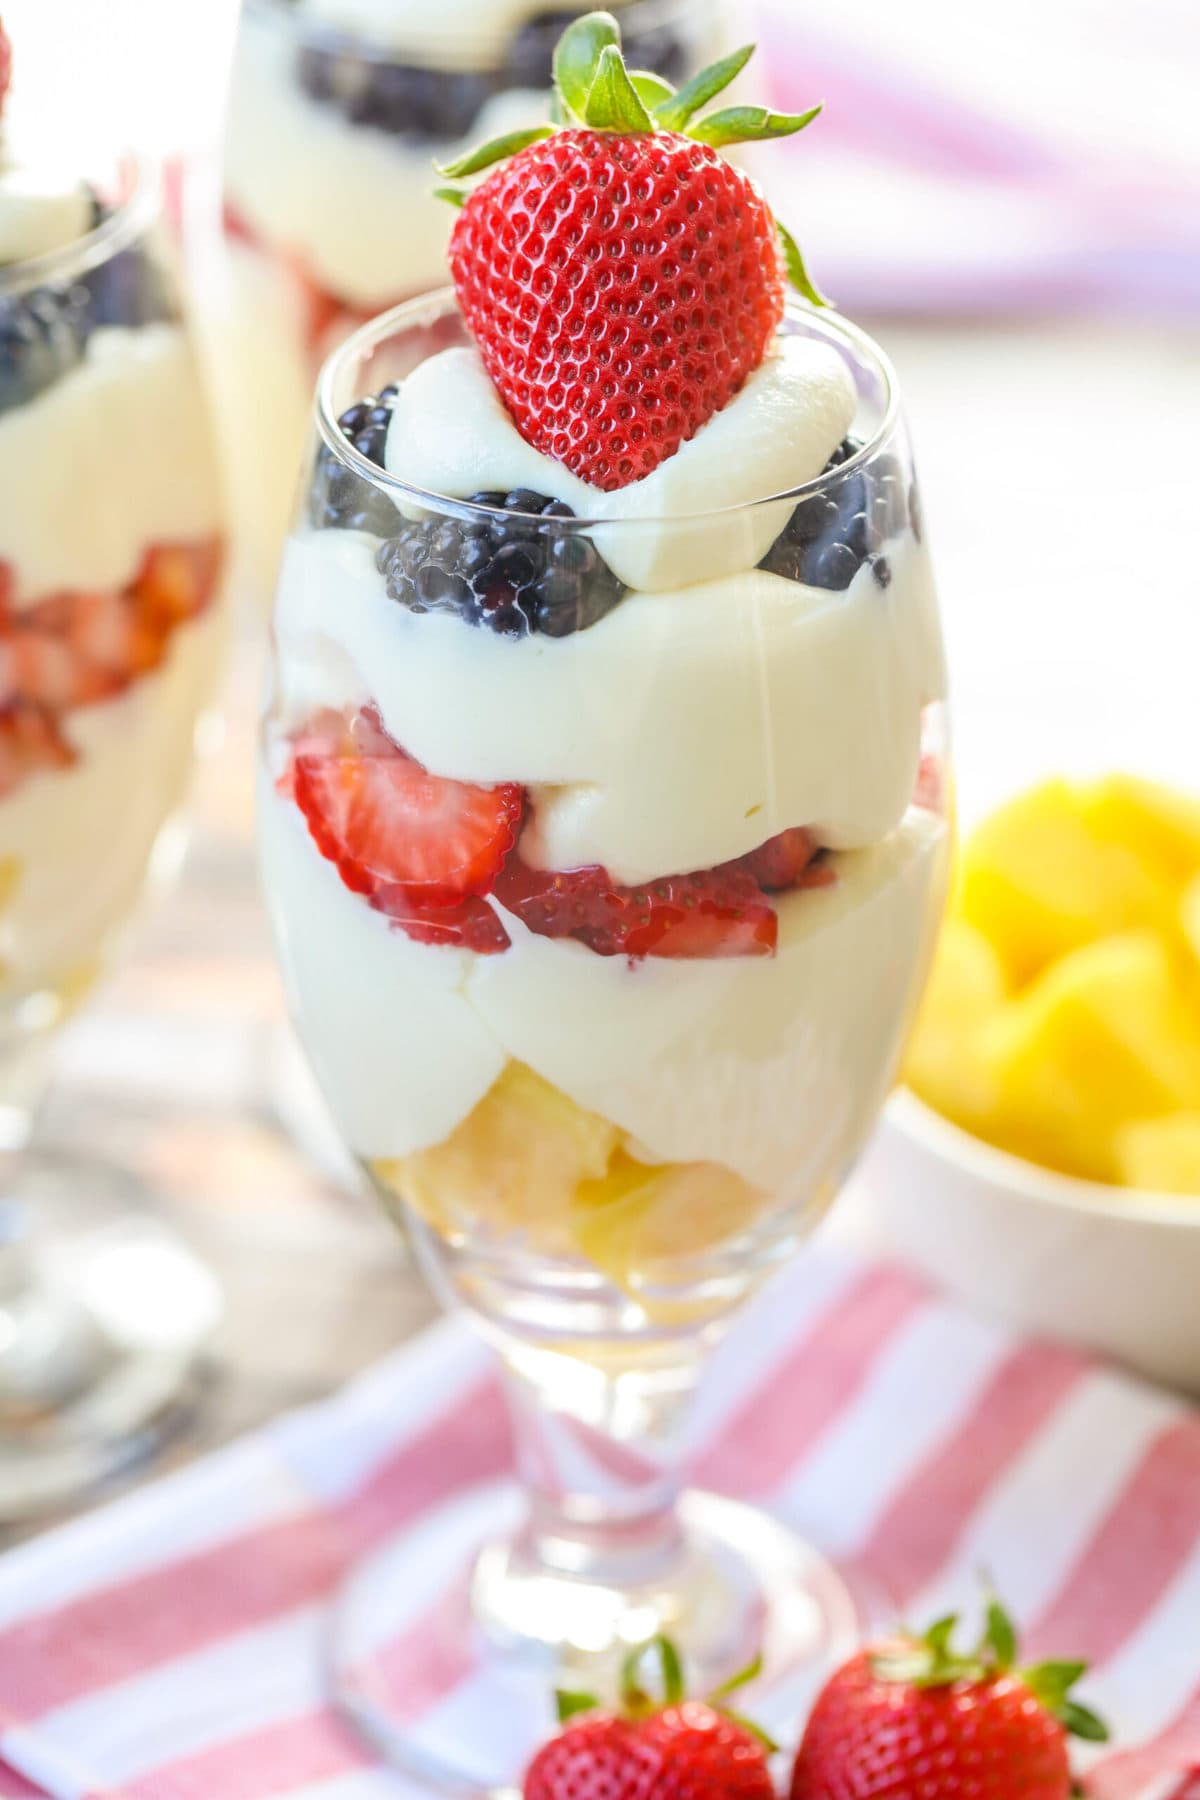 A dessert parfait layered in a glass and topped with a fresh strawberry.